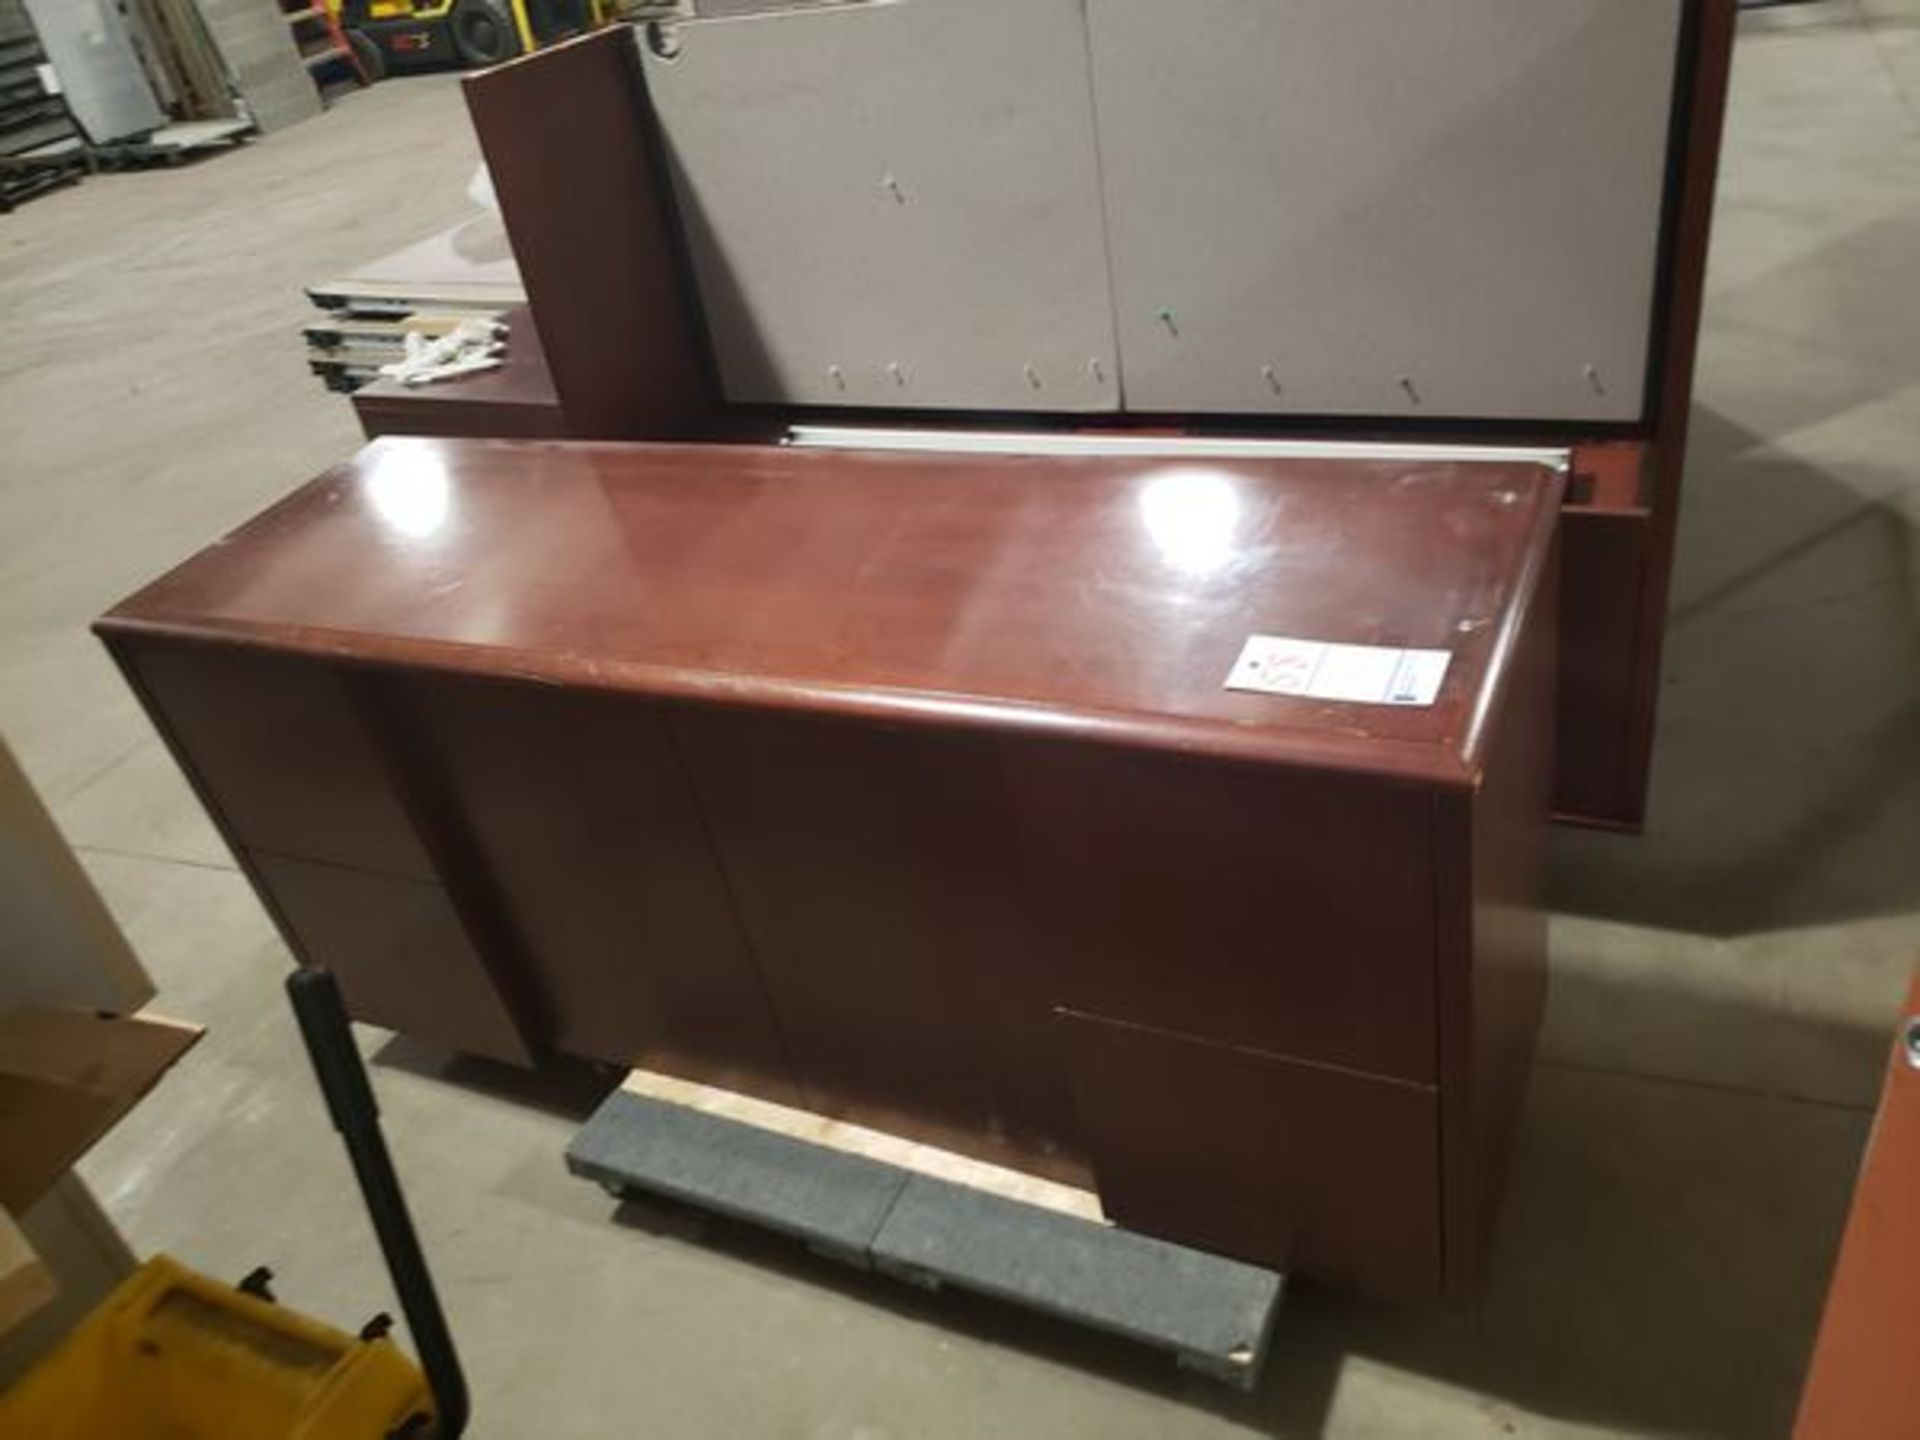 CREDENZA 65" X 20" WITH RISER